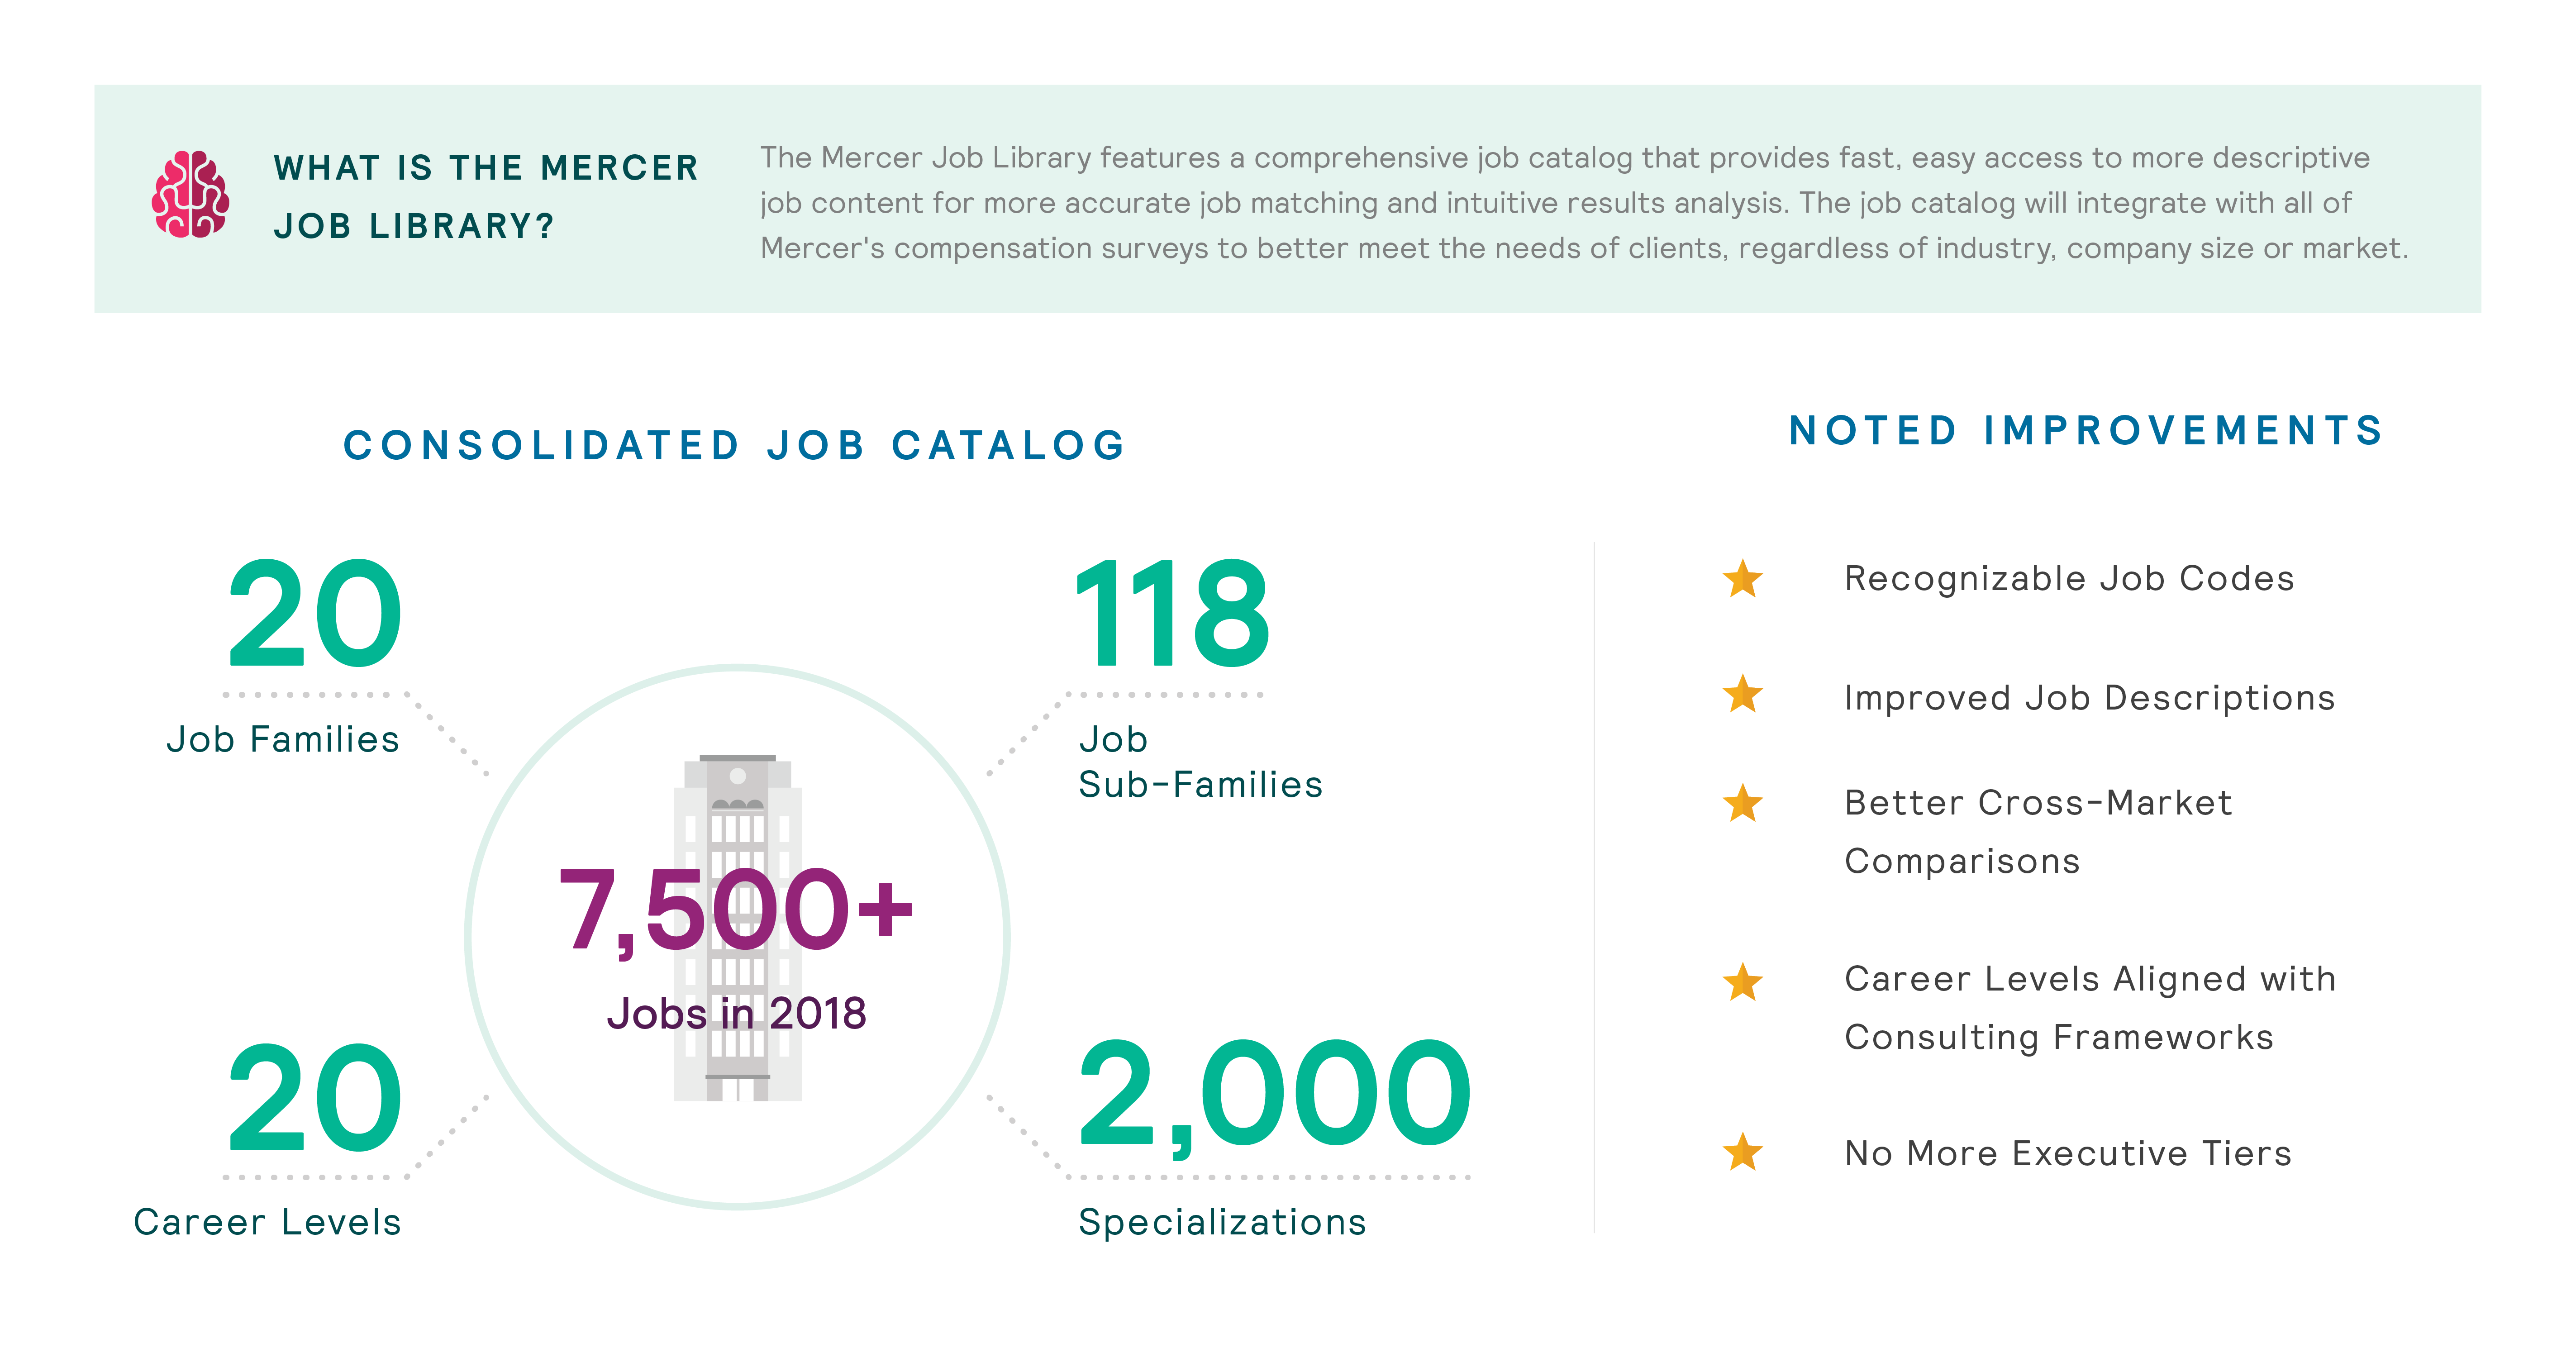 MBD Consolidated job catalog infographic image